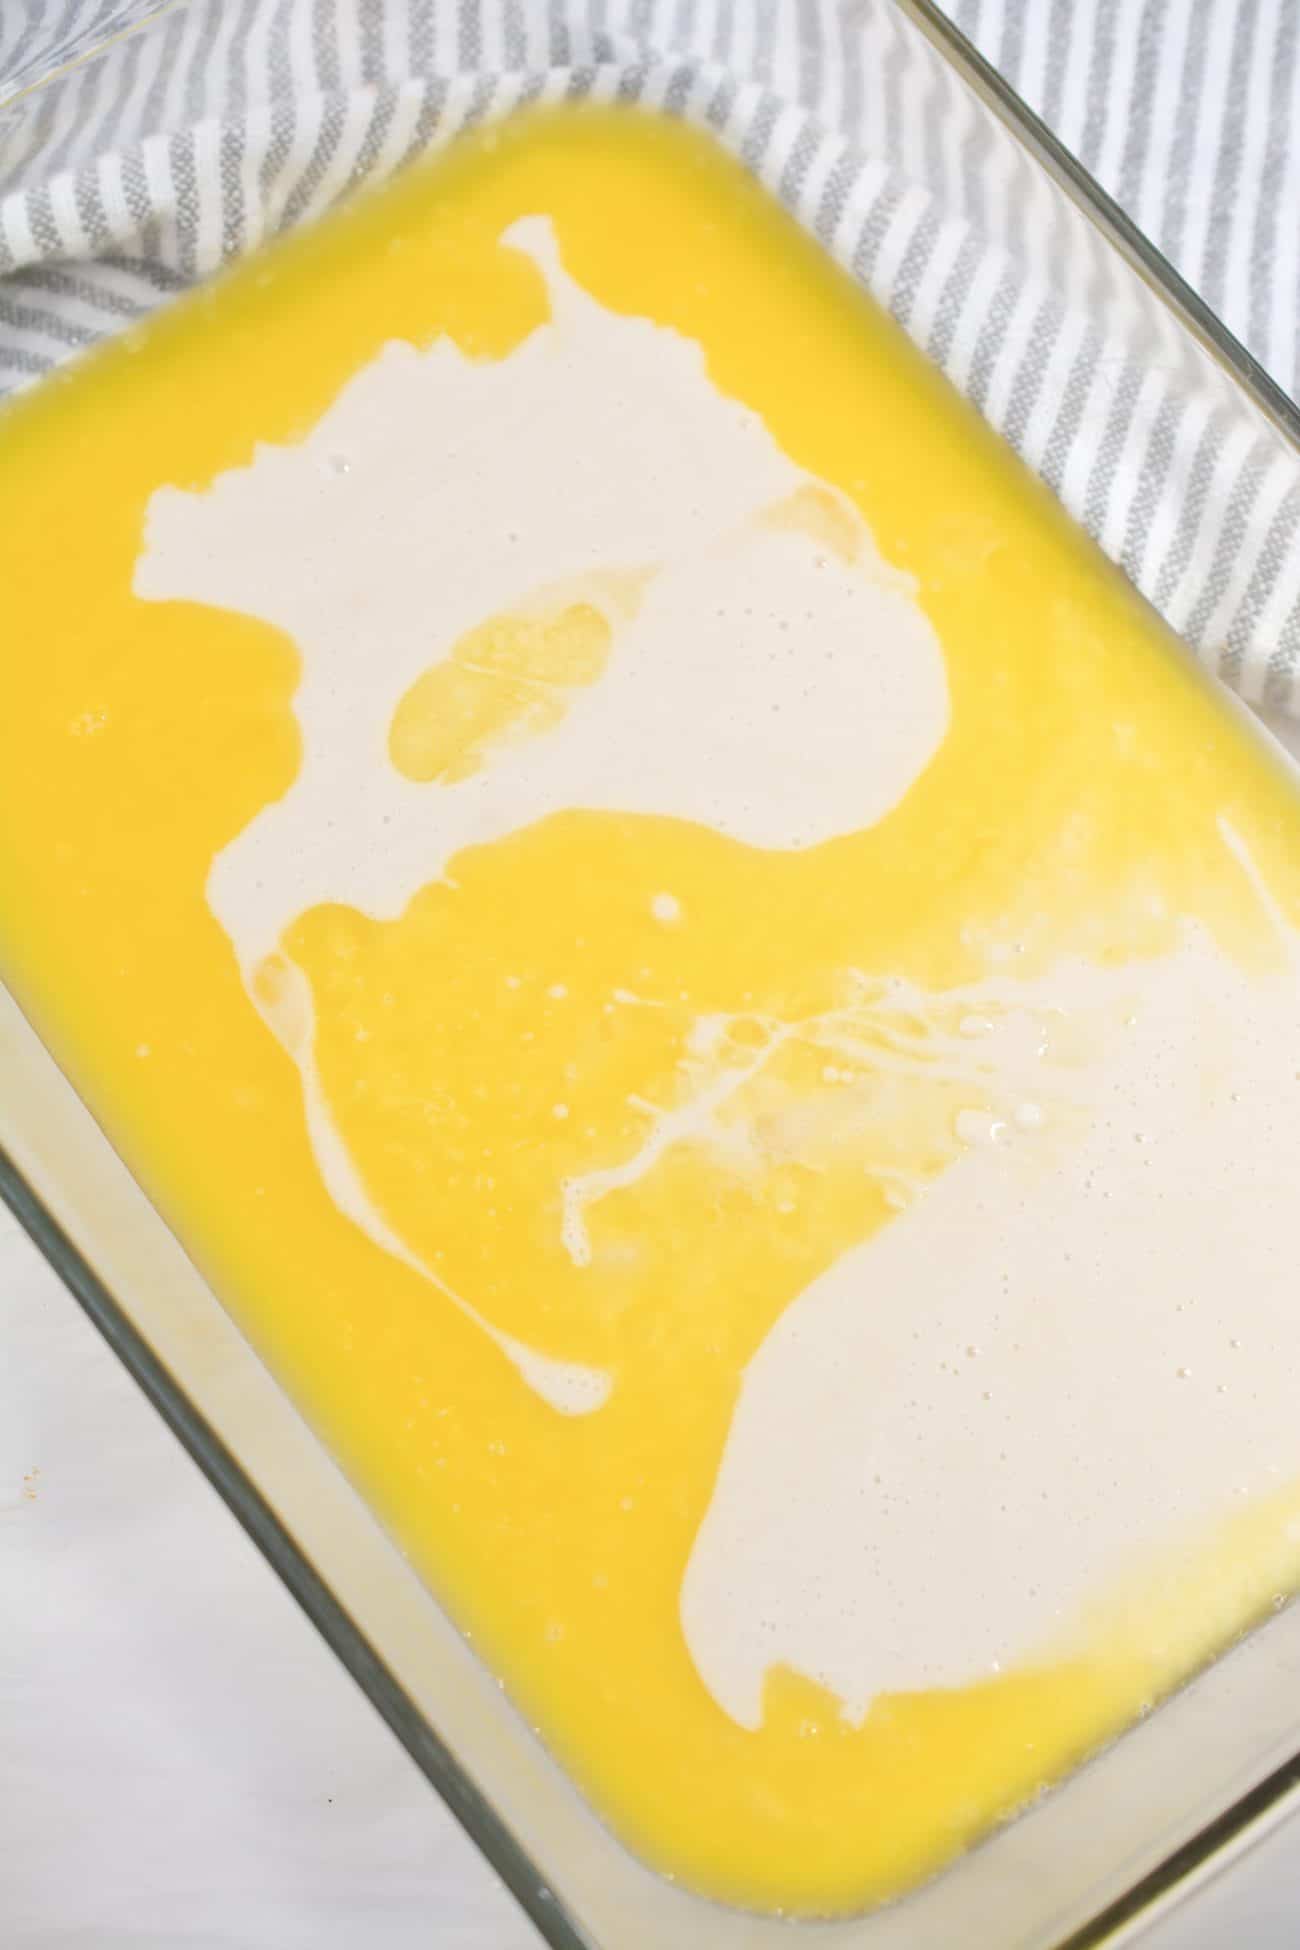 Pour the batter mixture over the butter or margarine